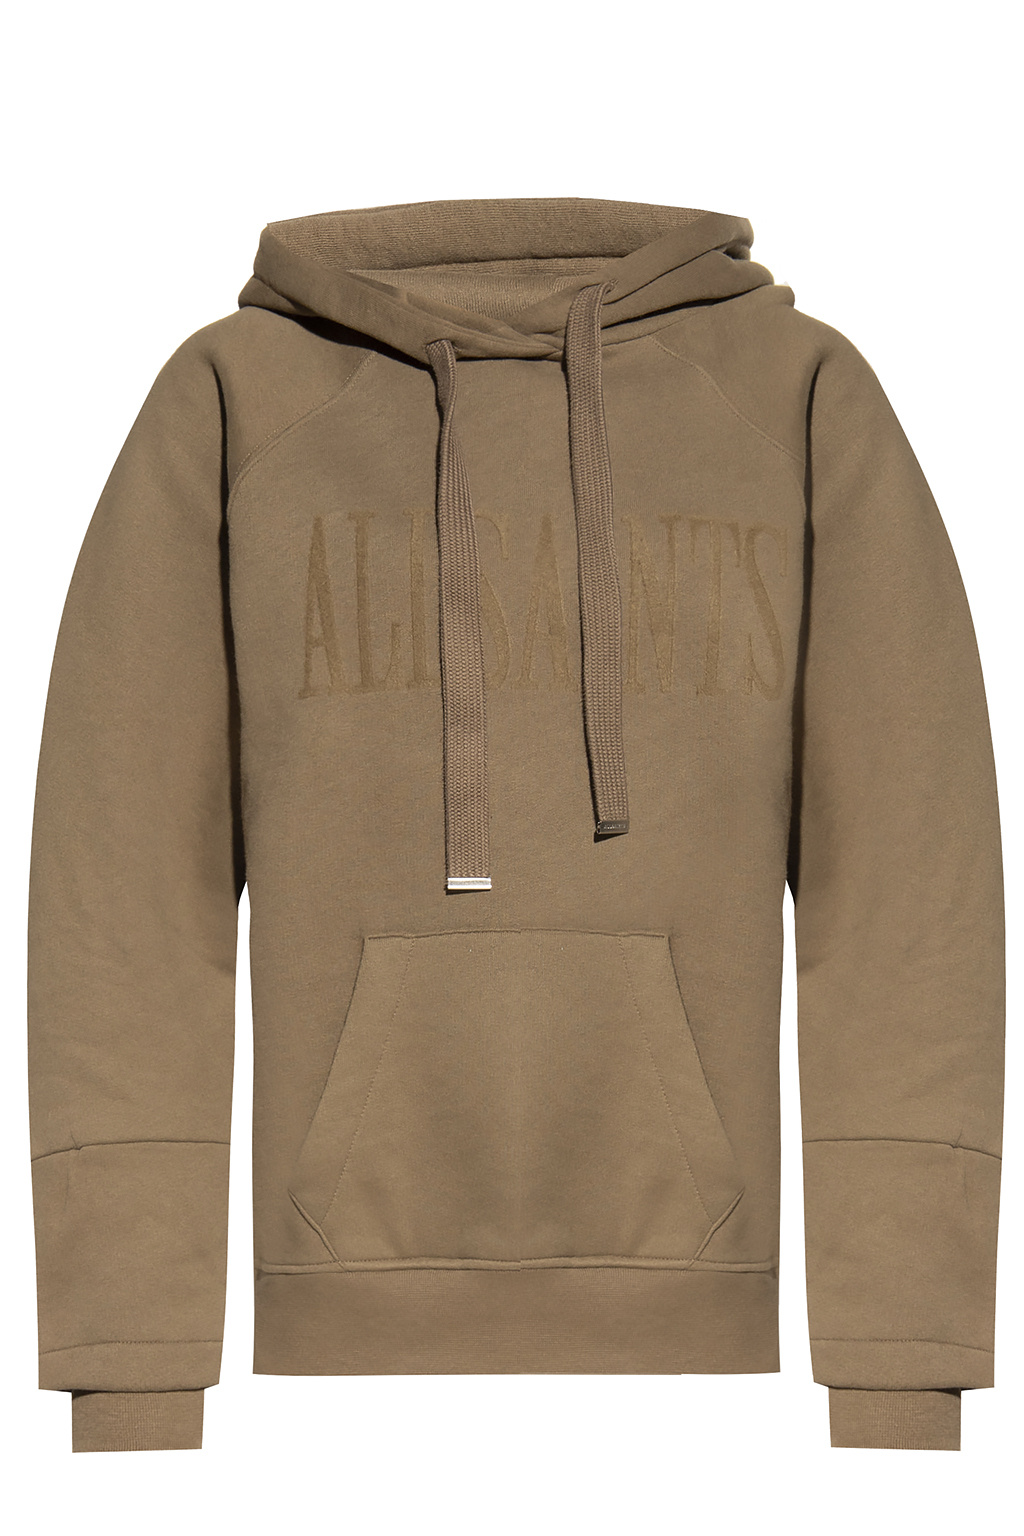 AllSaints 'Lucia' hoodie with logo | Women's Clothing | IetpShops